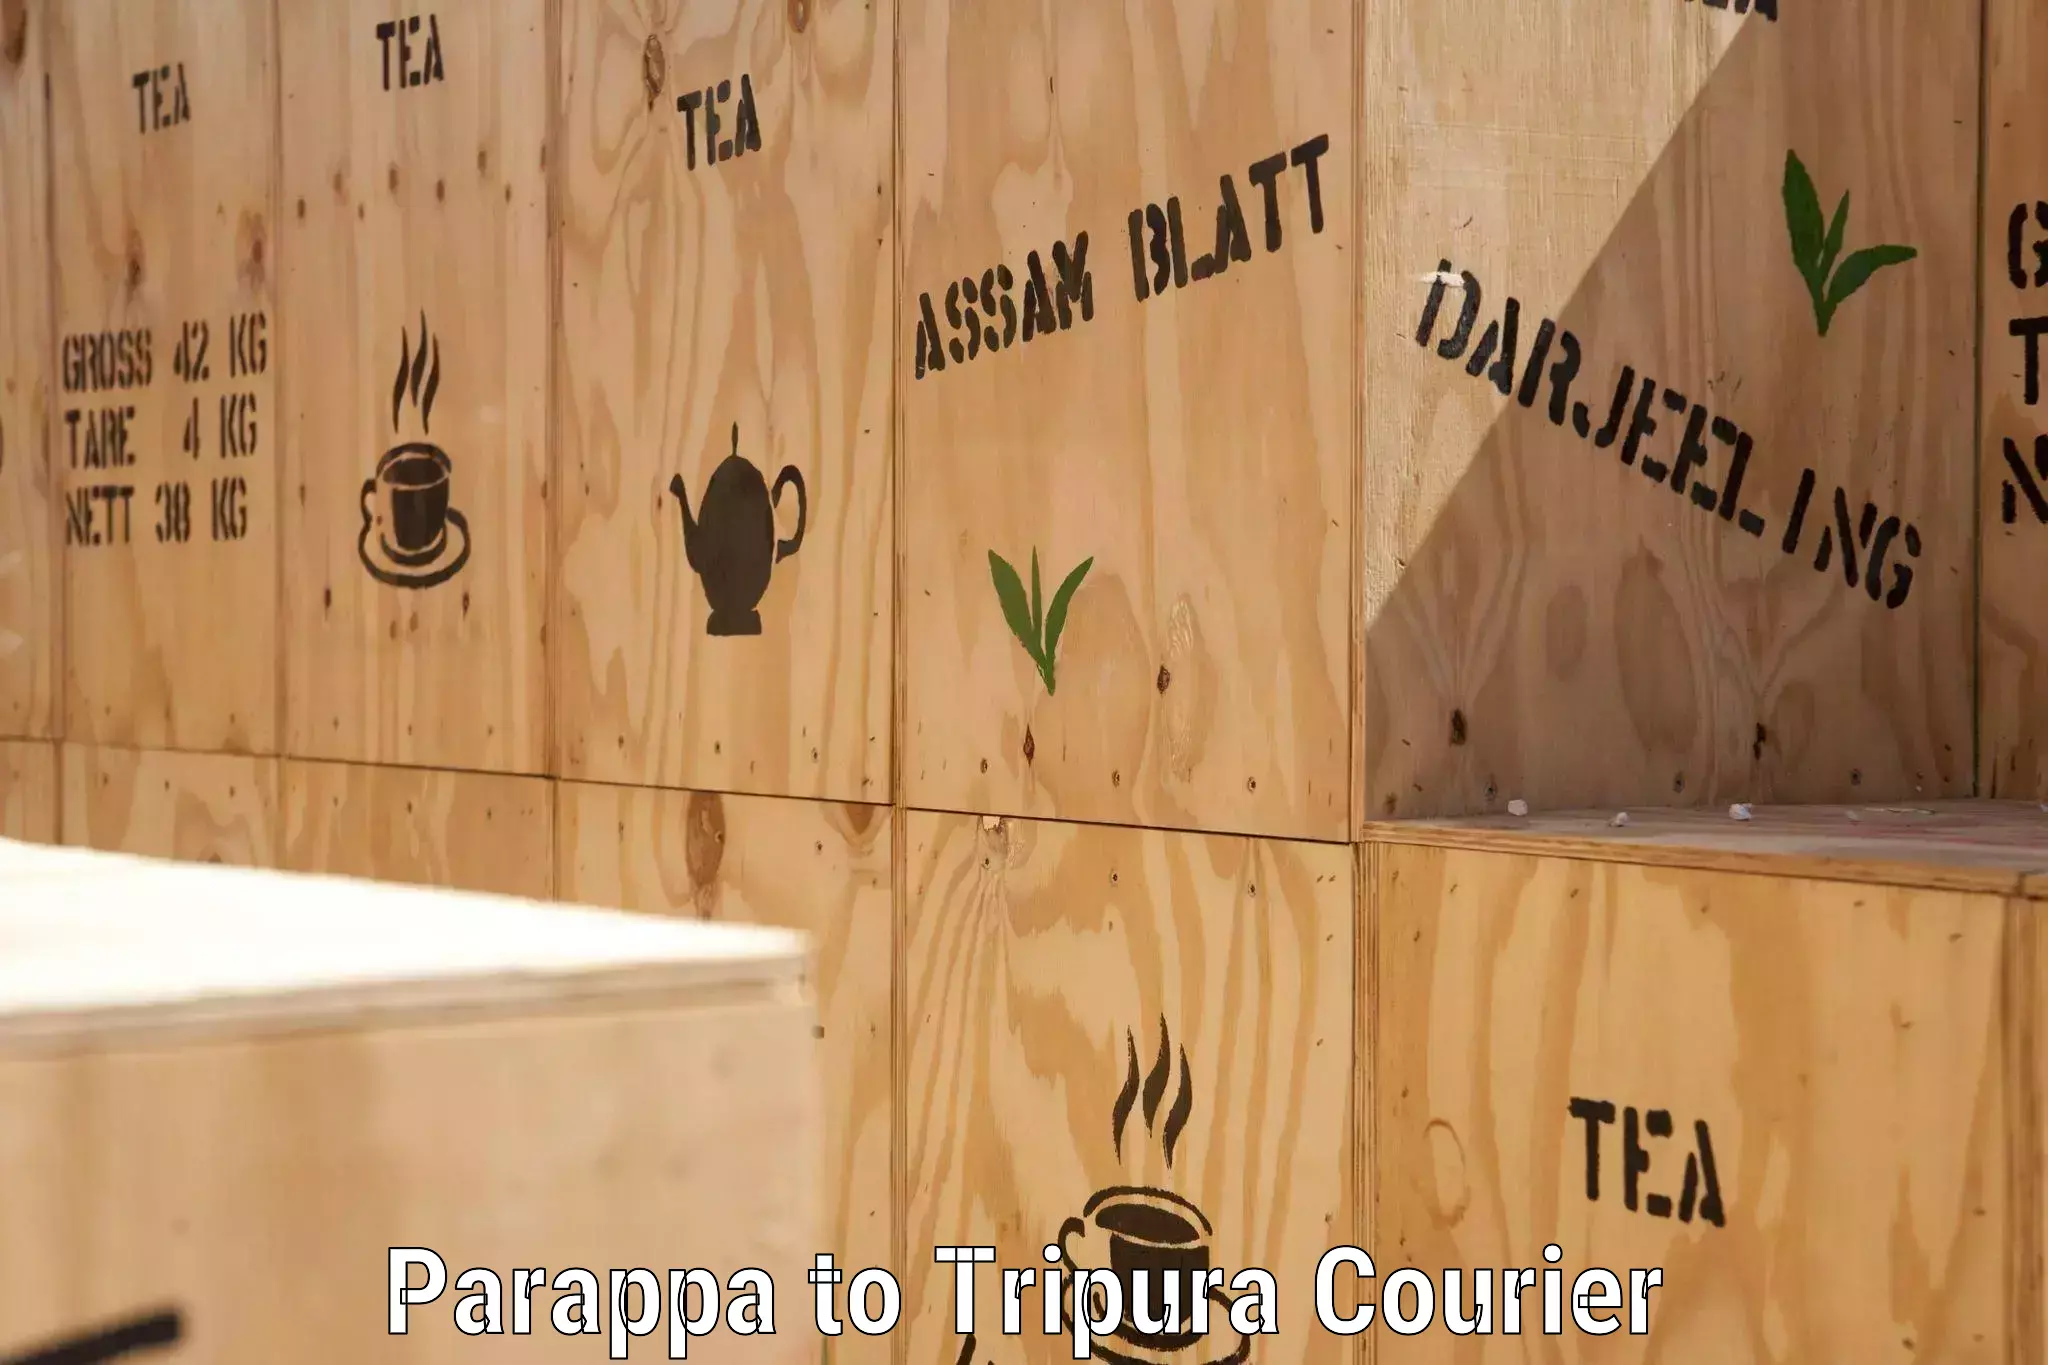 Reliable courier services Parappa to Udaipur Tripura